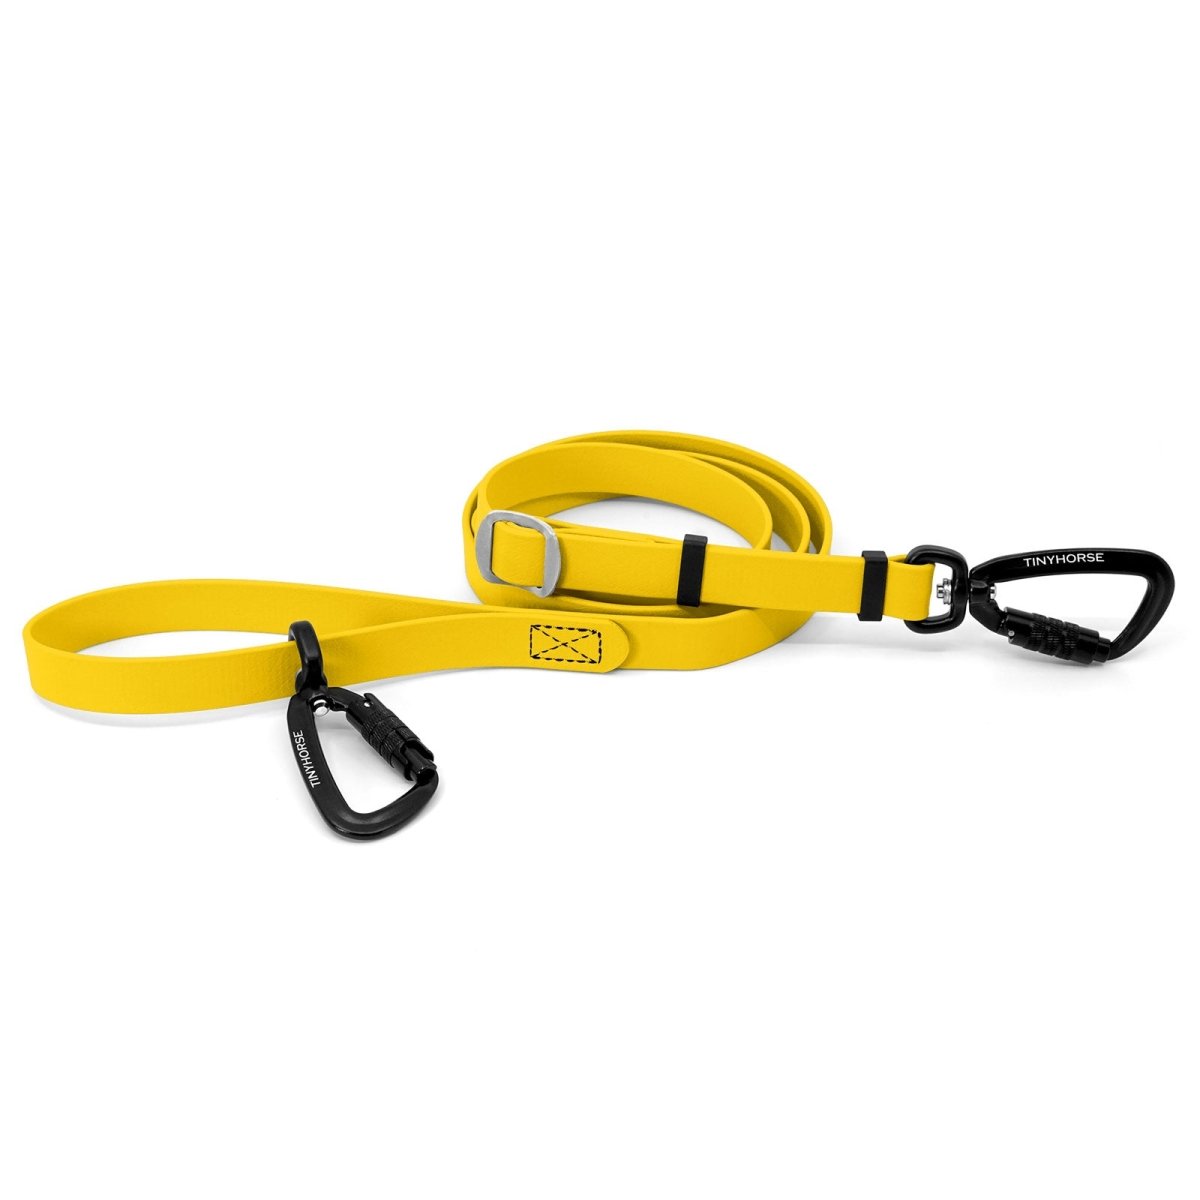 An adjustable yellow-coloured Lead-All Pro Extra made of BioThane with 2 auto-locking carabiners